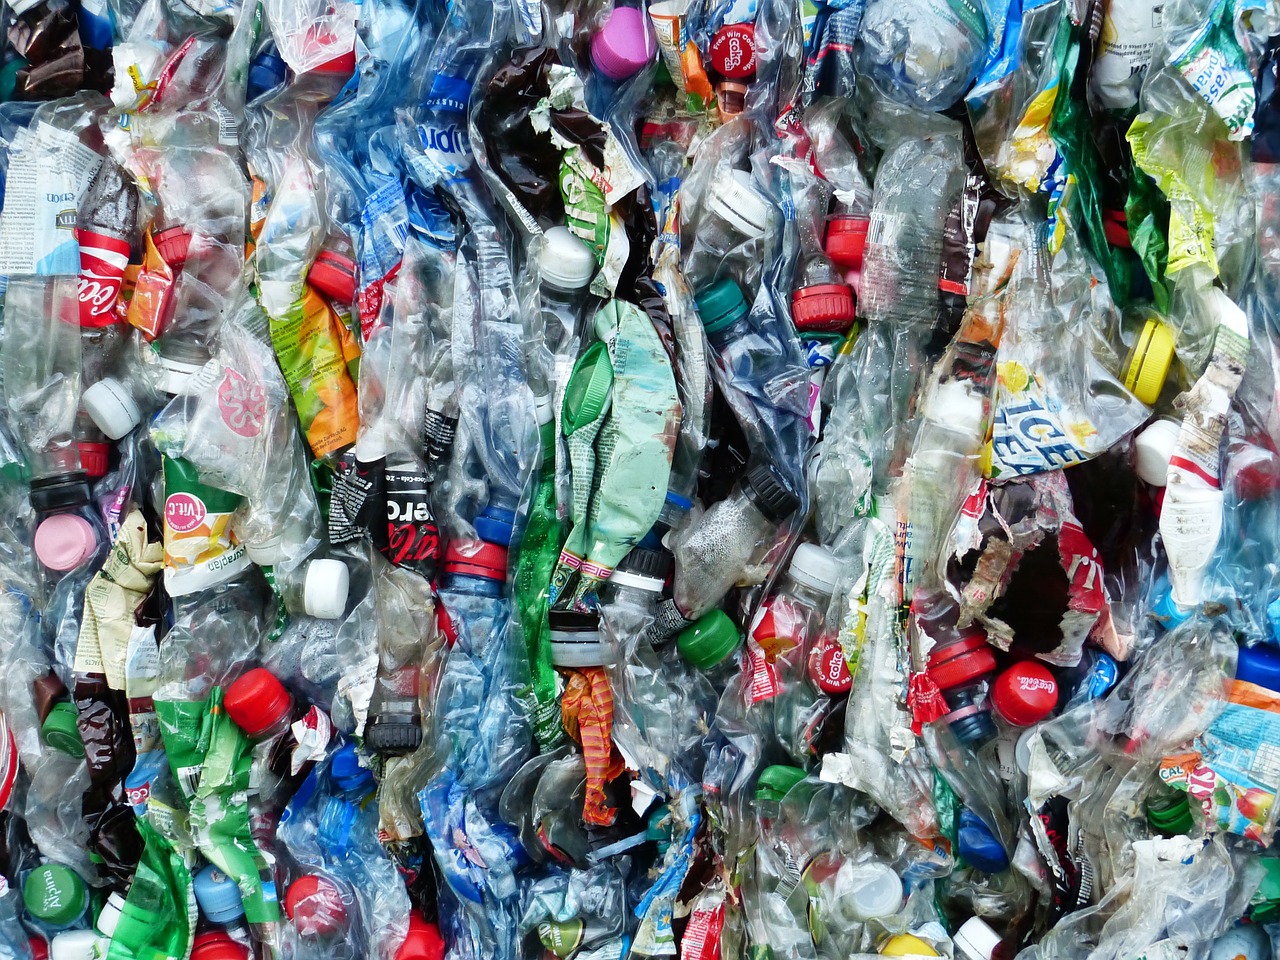 UN Environment Assembly adopts resolution to negotiate global plastic pollution treaty